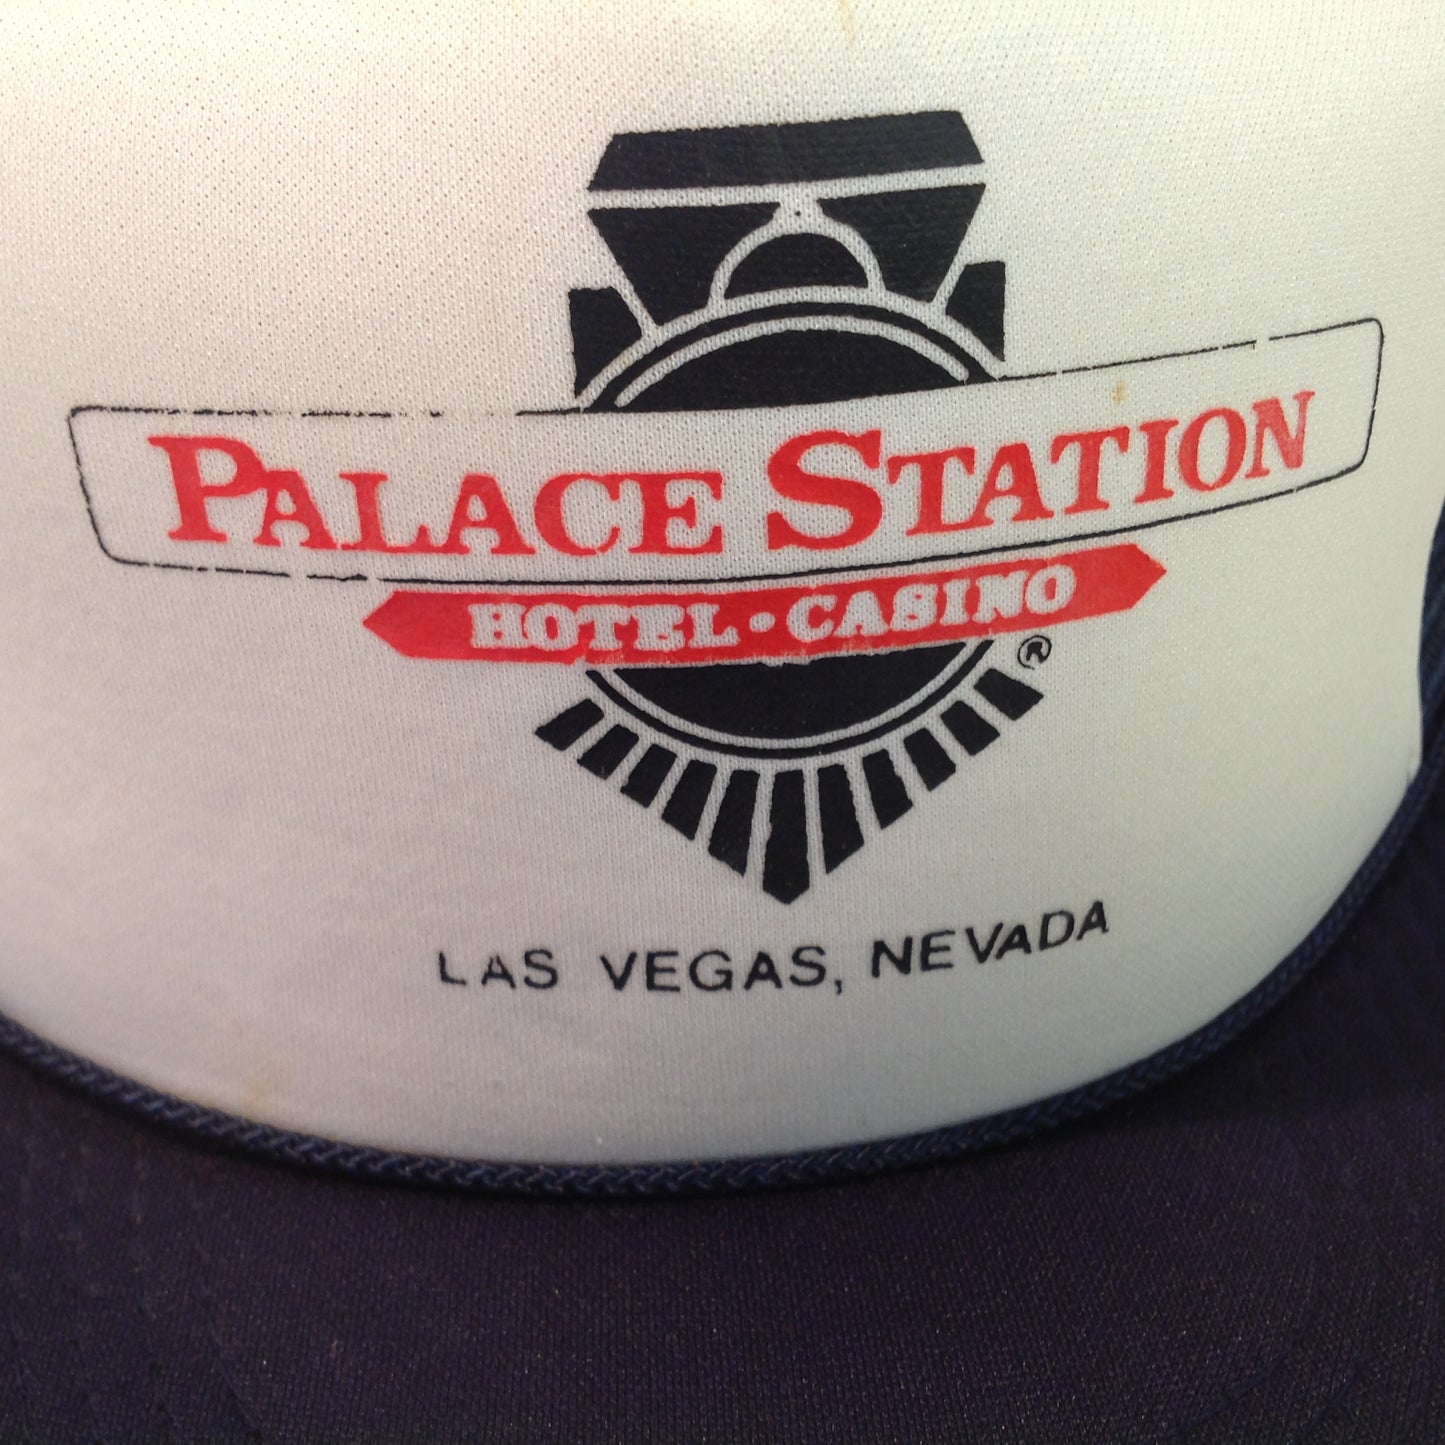 Vintage Size-A-Just Palace Station Hotel and Casino Las Vegas Nevada Golf Tournament Souvenir Black and White Foam Mesh Trucker's Cap